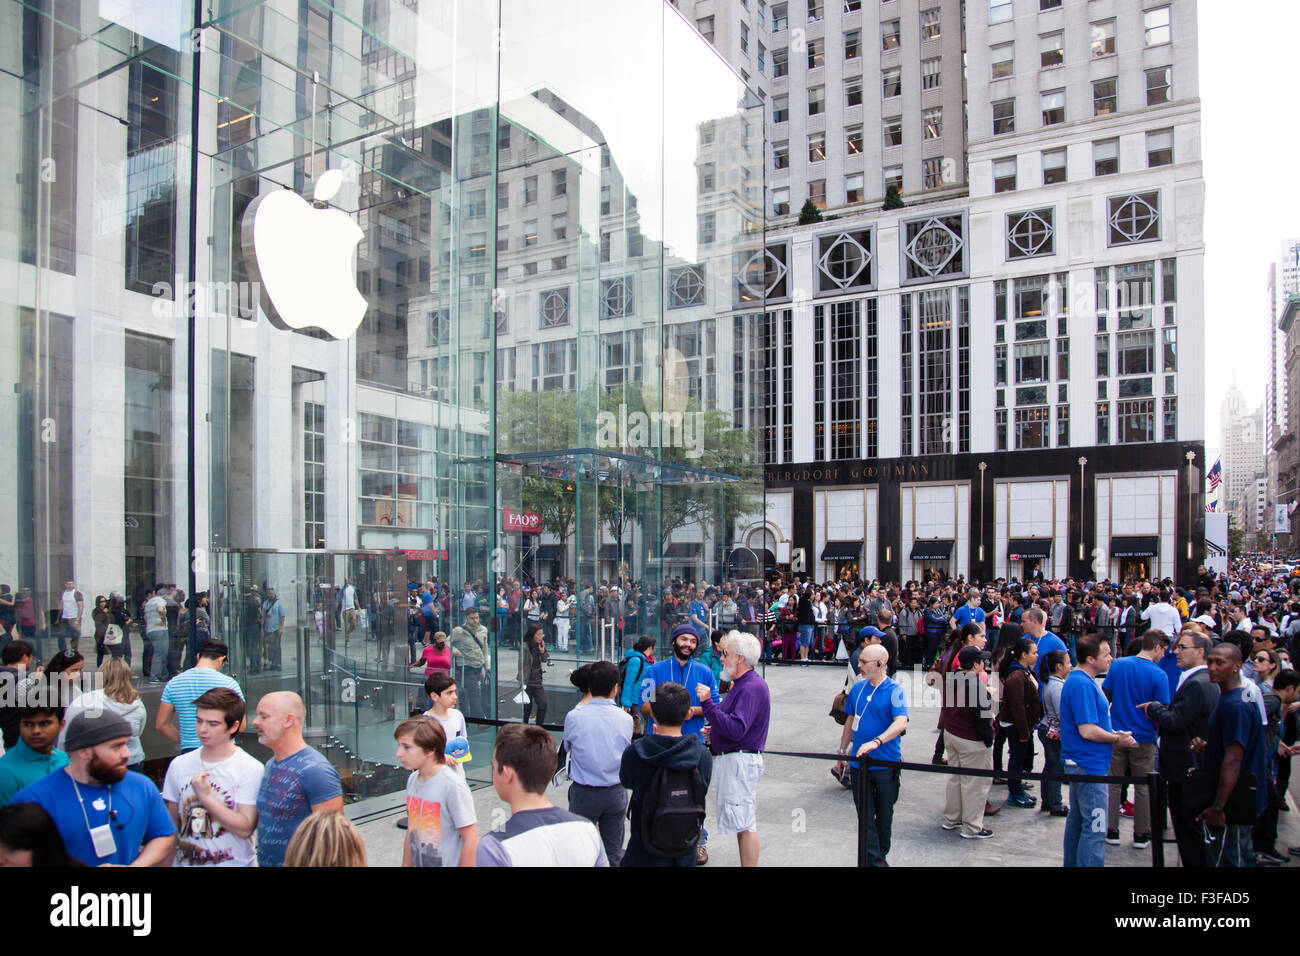 People waiting for the iPhone 6 in front of the Apple store on Fifth Avenue New York Stock Photo